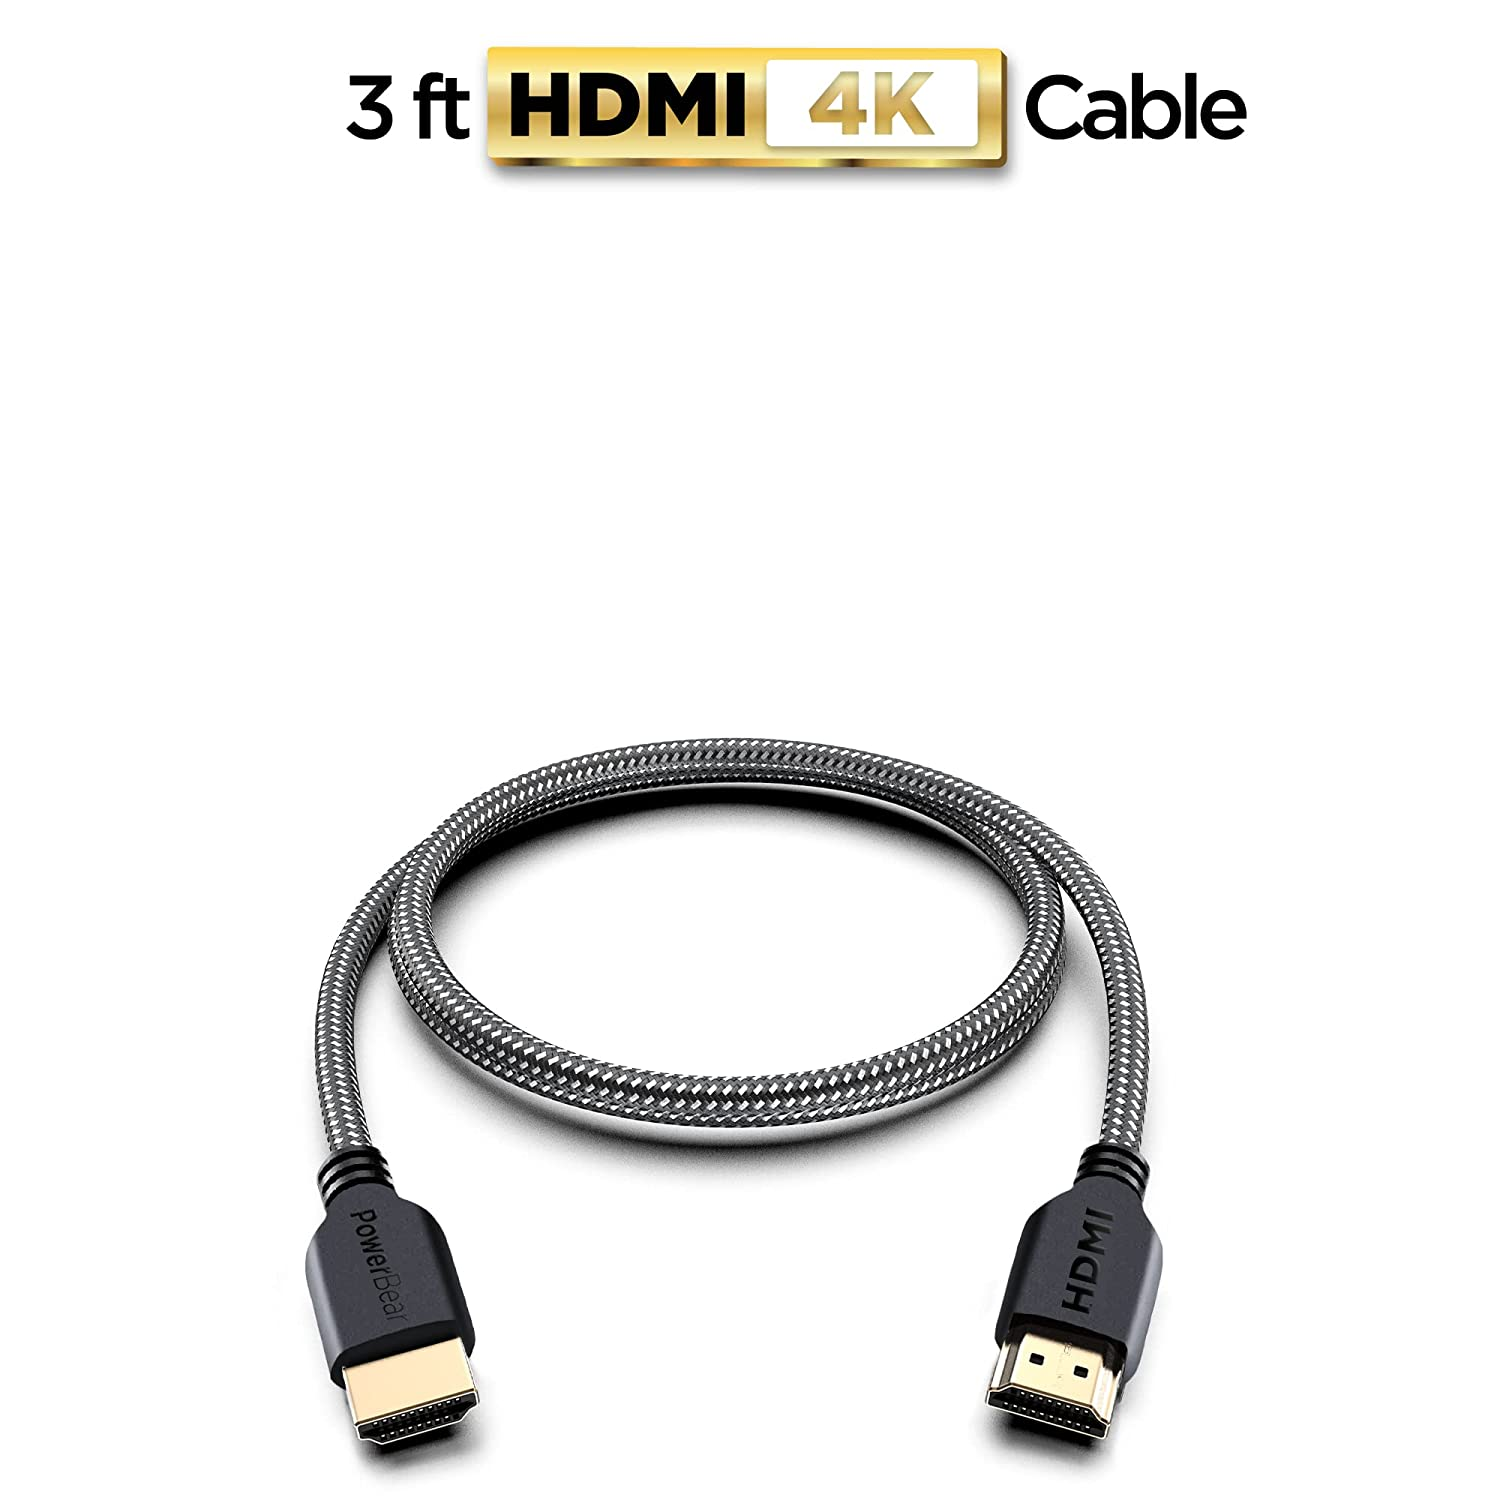 PowerBear 4K HDMI Cable 6 ft [2 Pack] High Speed, Braided Nylon & Gold Connectors, 4K @ 60Hz, Ultra HD, 2K, 1080P, ARC & CL3 Rated | for Laptop, Monitor, PS5, PS4, Xbox One, Fire TV, Apple TV & More